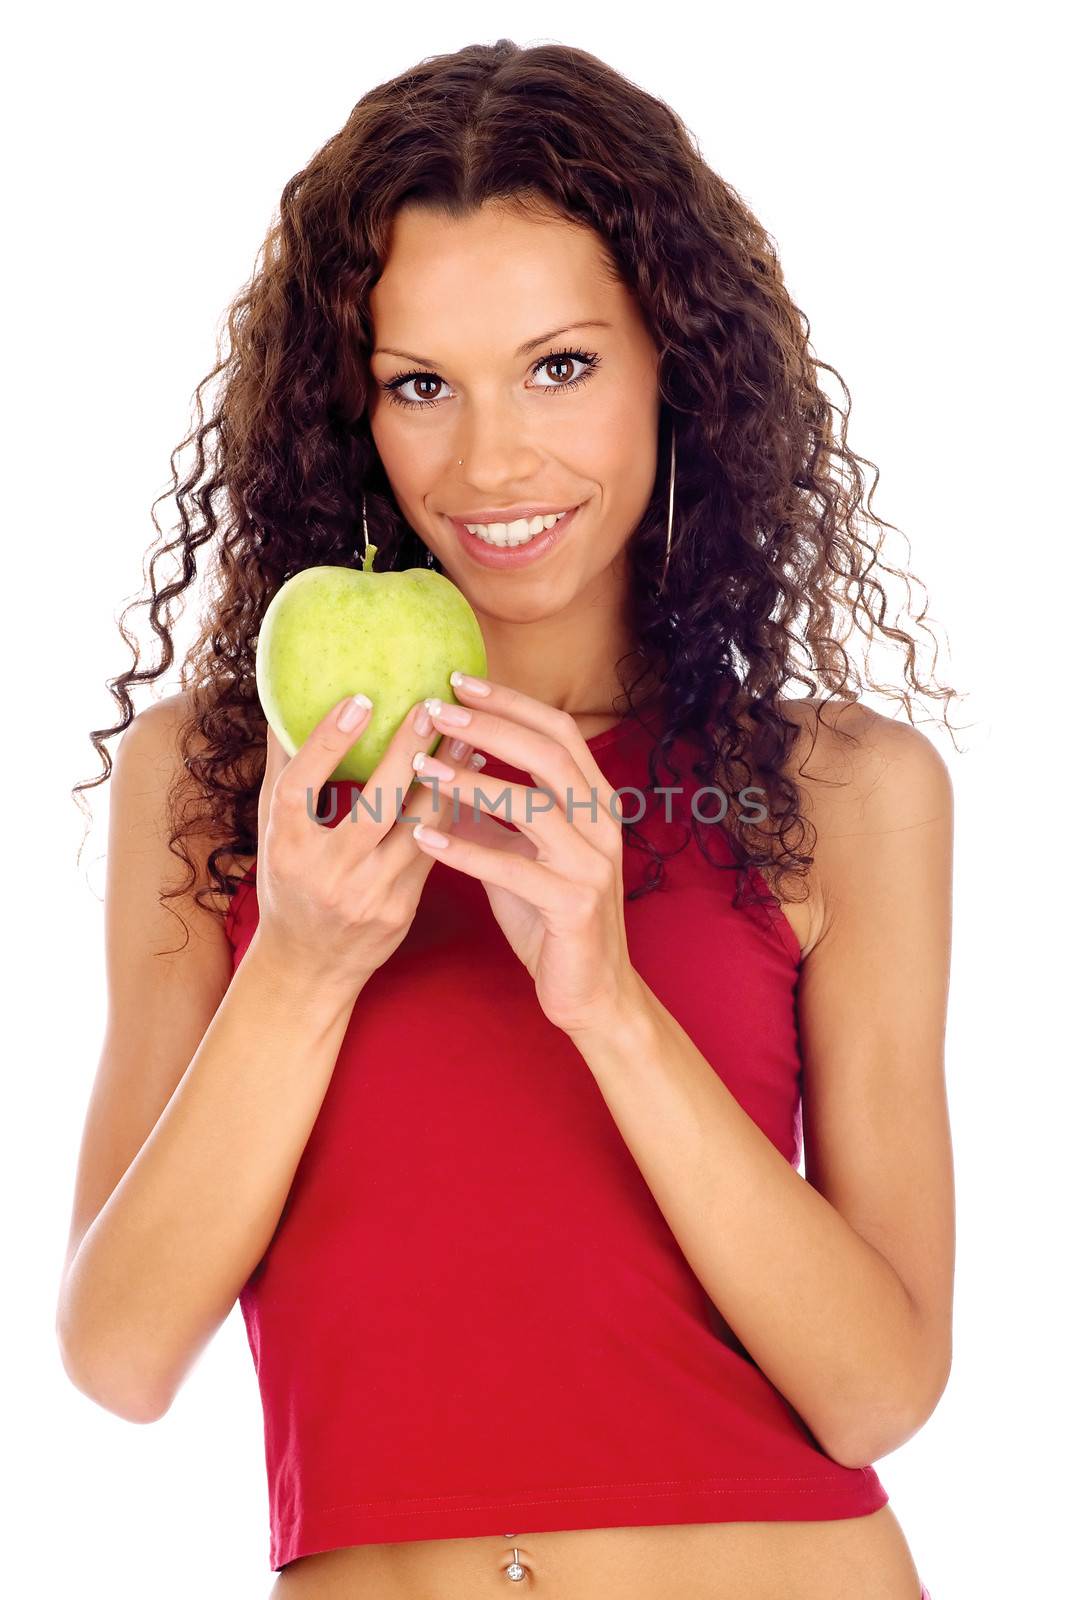 Curl hair brunette woman holding greeen apple, isolated